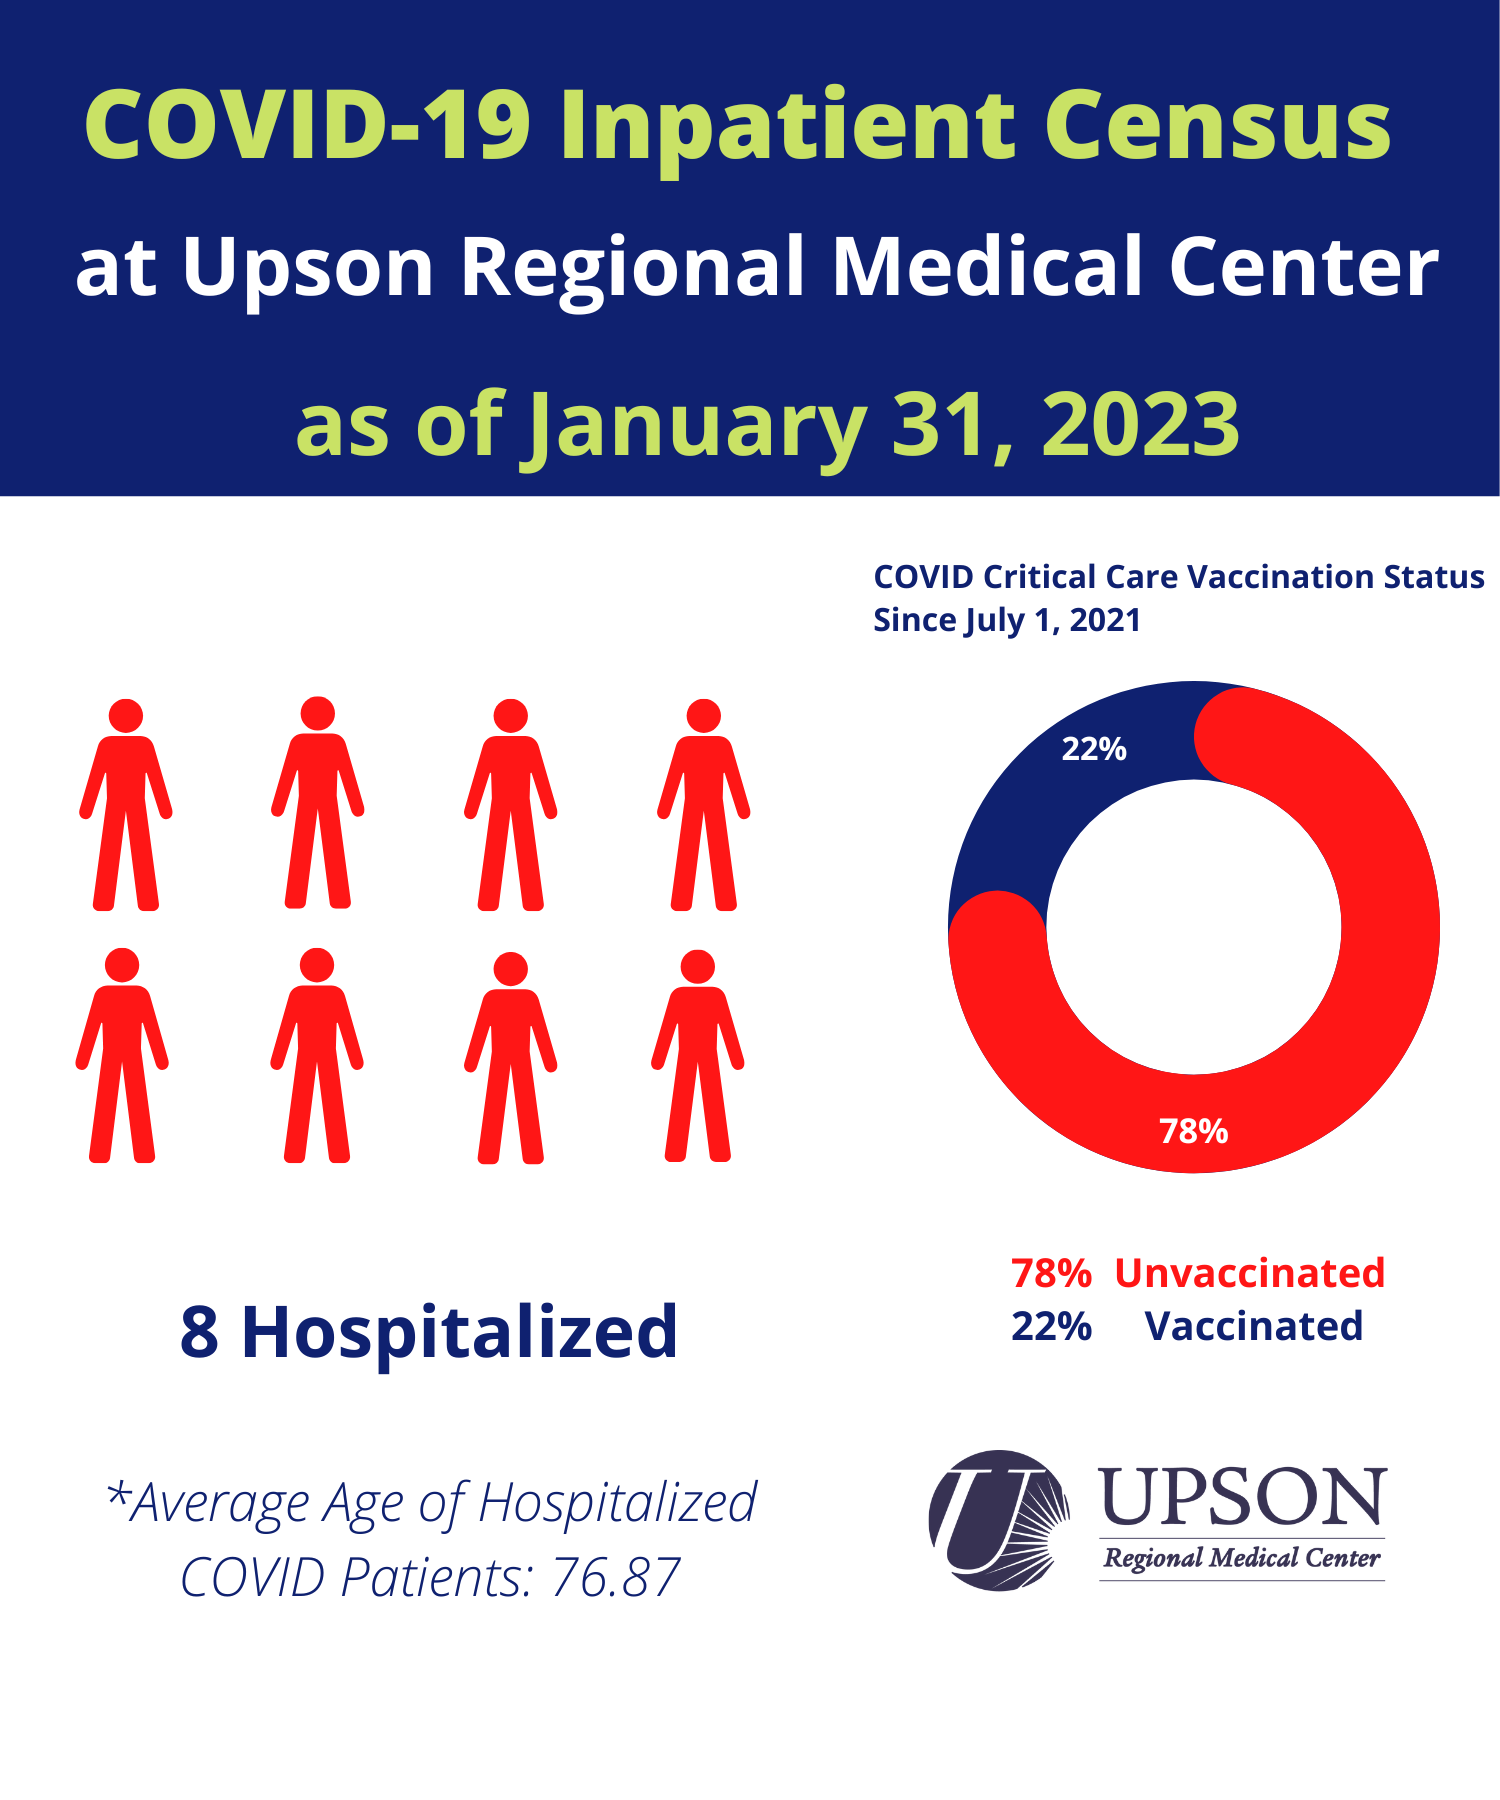 Photo for URMC COVID-19 inpatient status as of January 31, 2023.